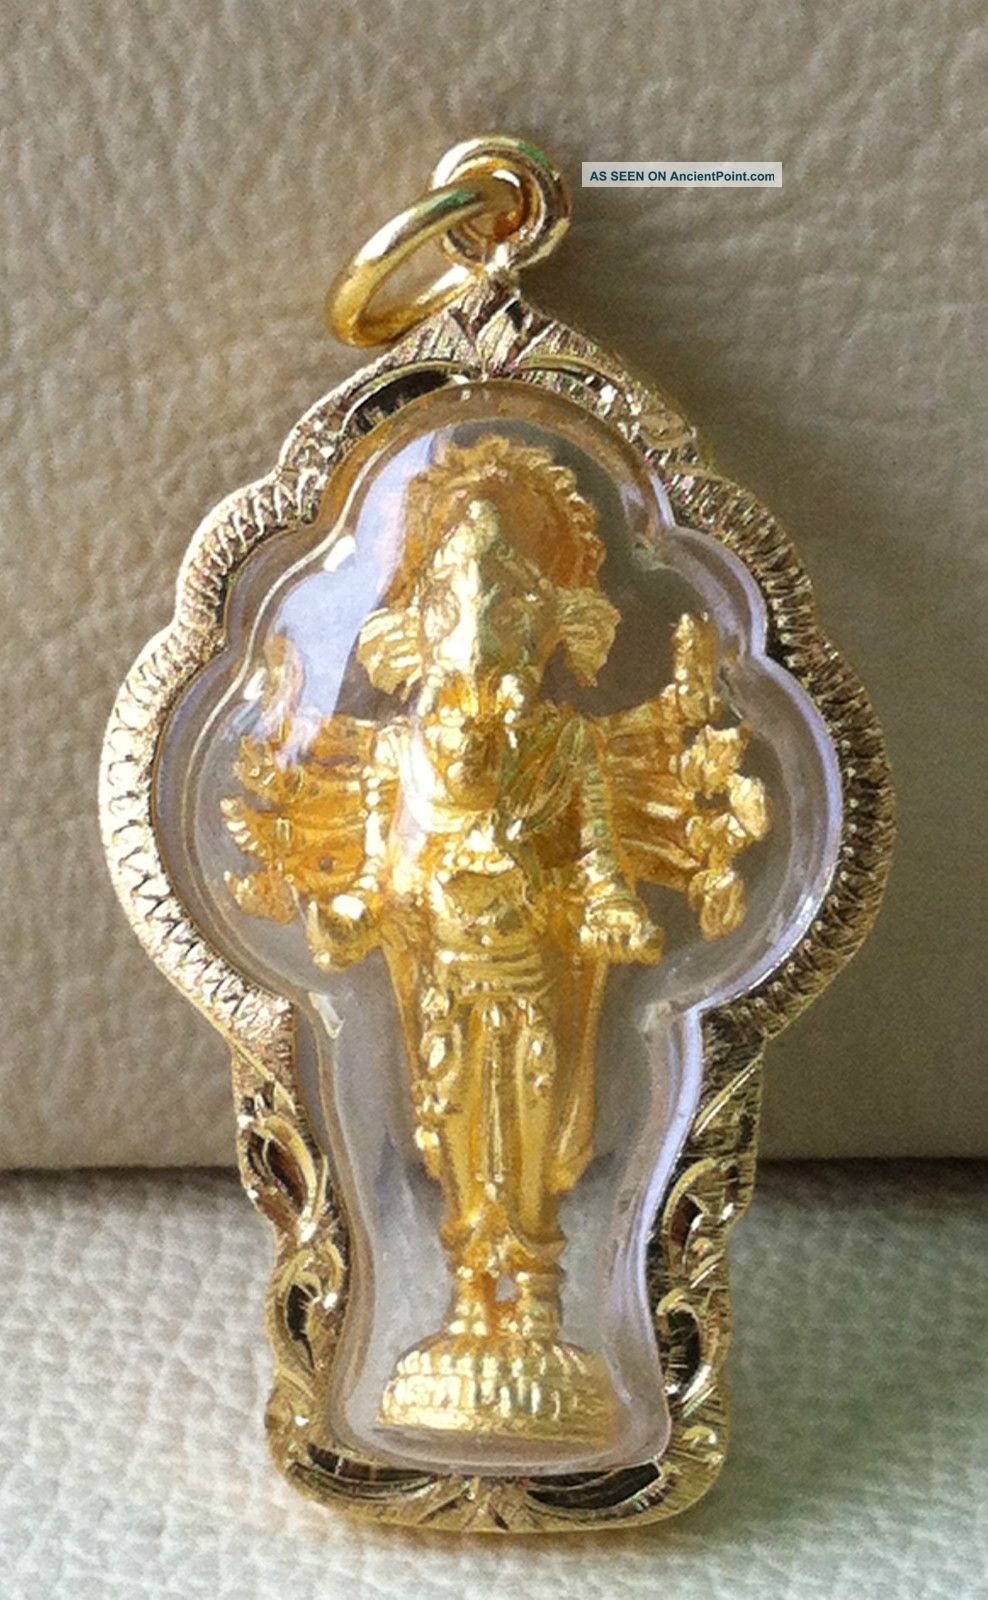 Powerful Lord Ganesha Om Hindu On Skull Luck Rich Wealth Safe Knowledge Amulet Amulets photo